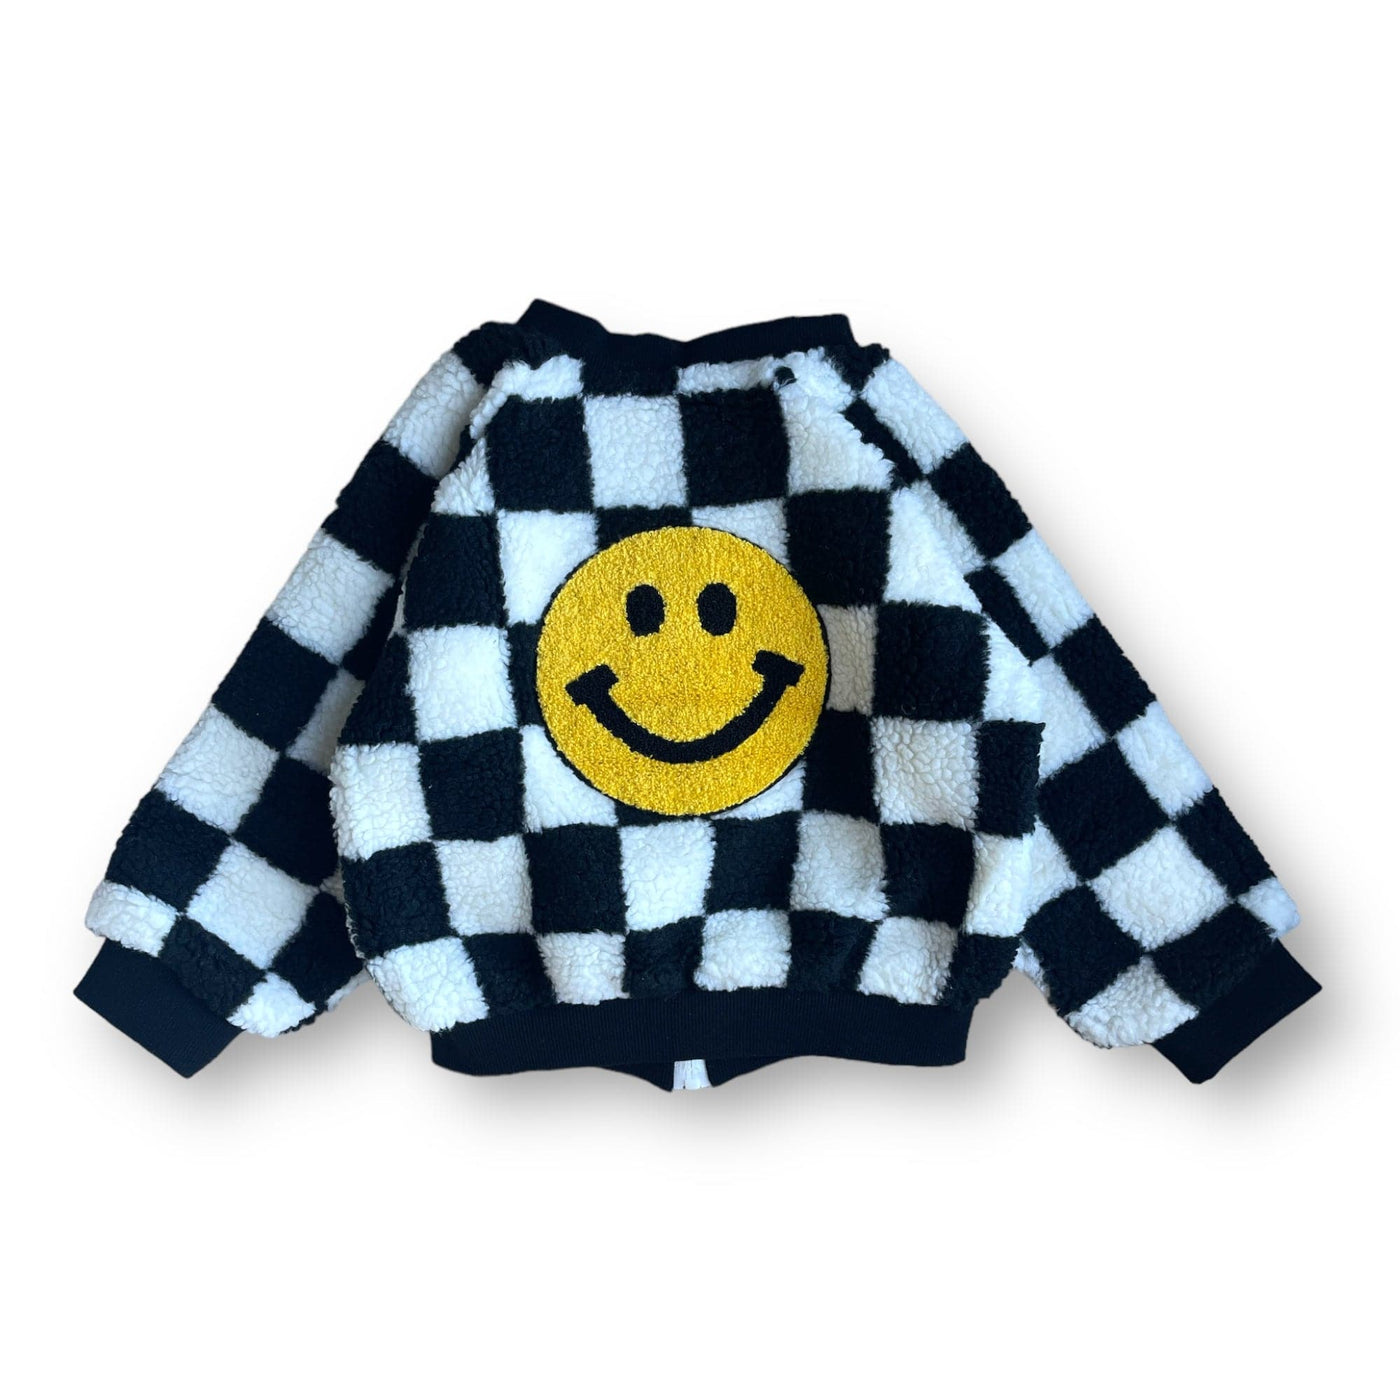 Best Day Ever Kids Baby & Toddler Outerwear The Big Happy Jacket buy online boutique kids clothing